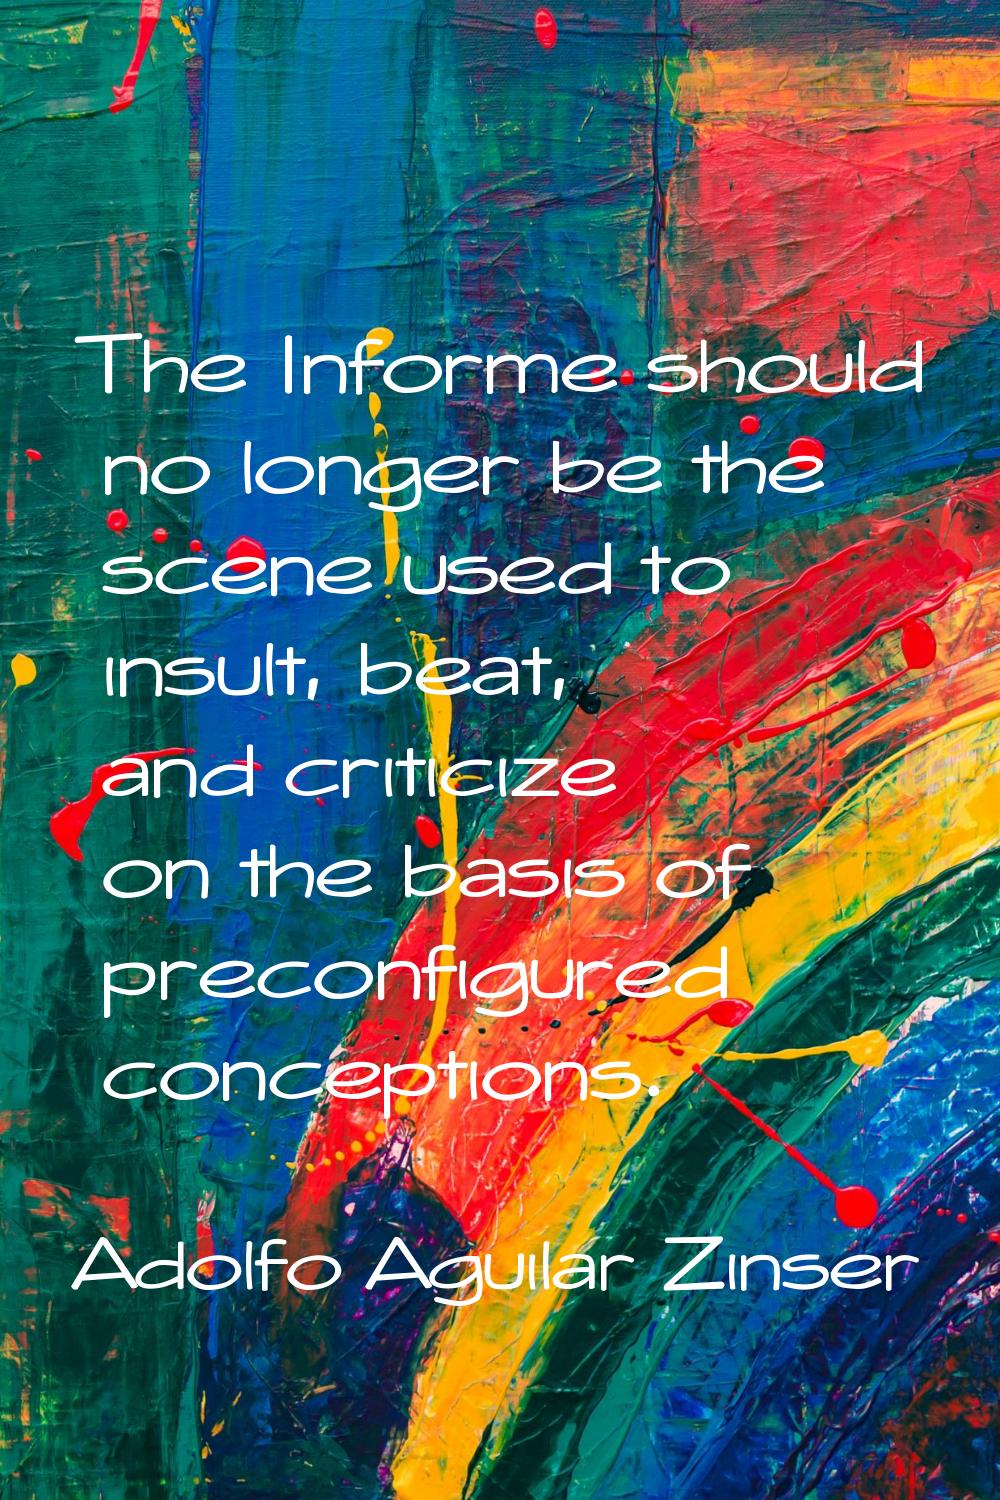 The Informe should no longer be the scene used to insult, beat, and criticize on the basis of preco